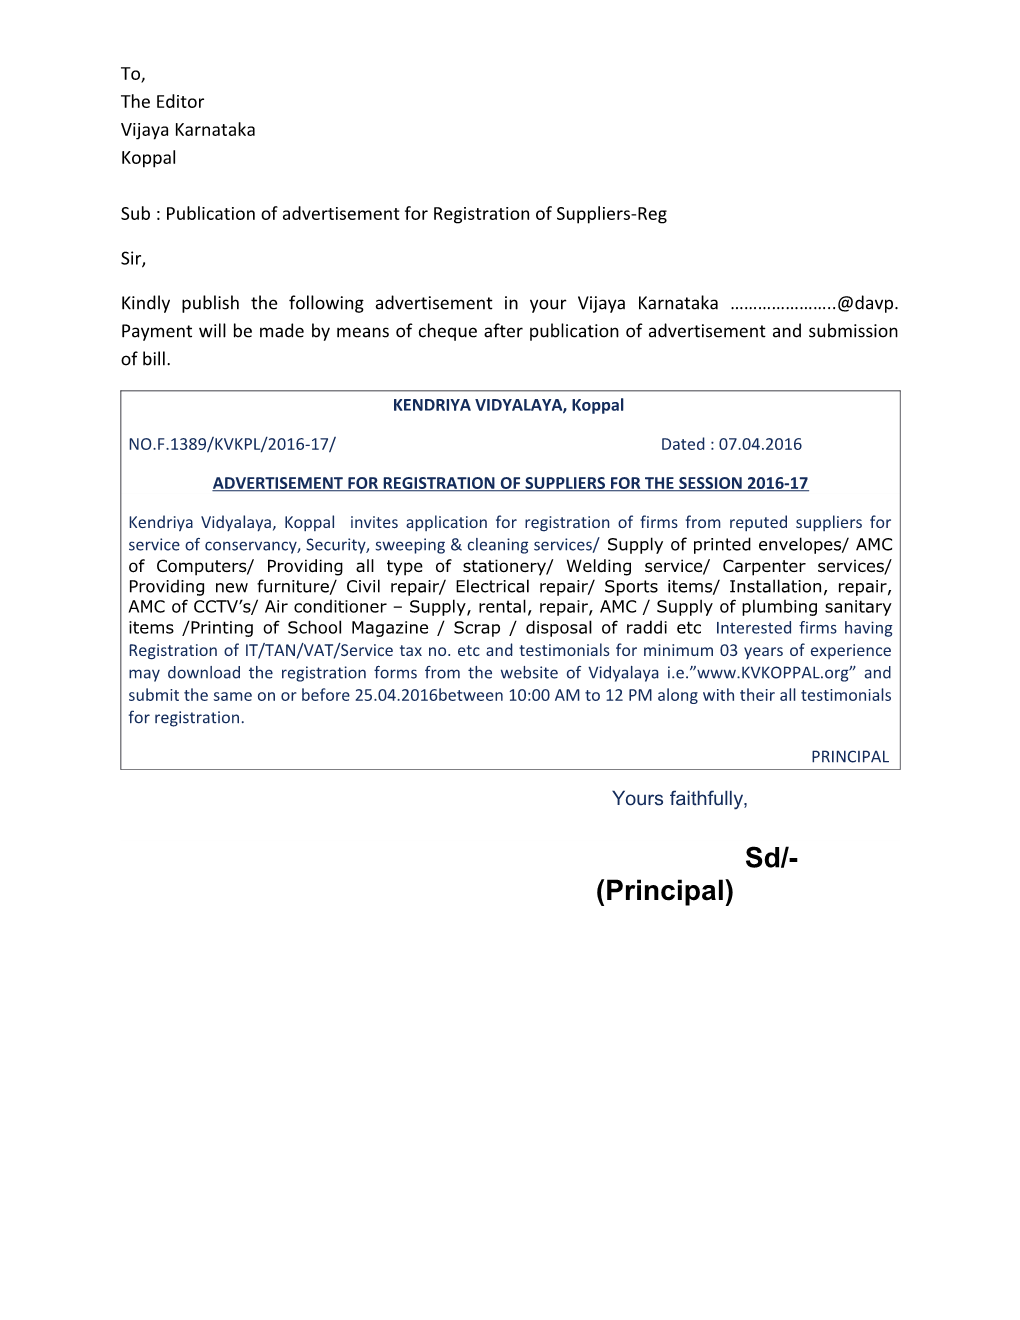 Sub : Publication of Advertisement for Registration of Suppliers-Reg